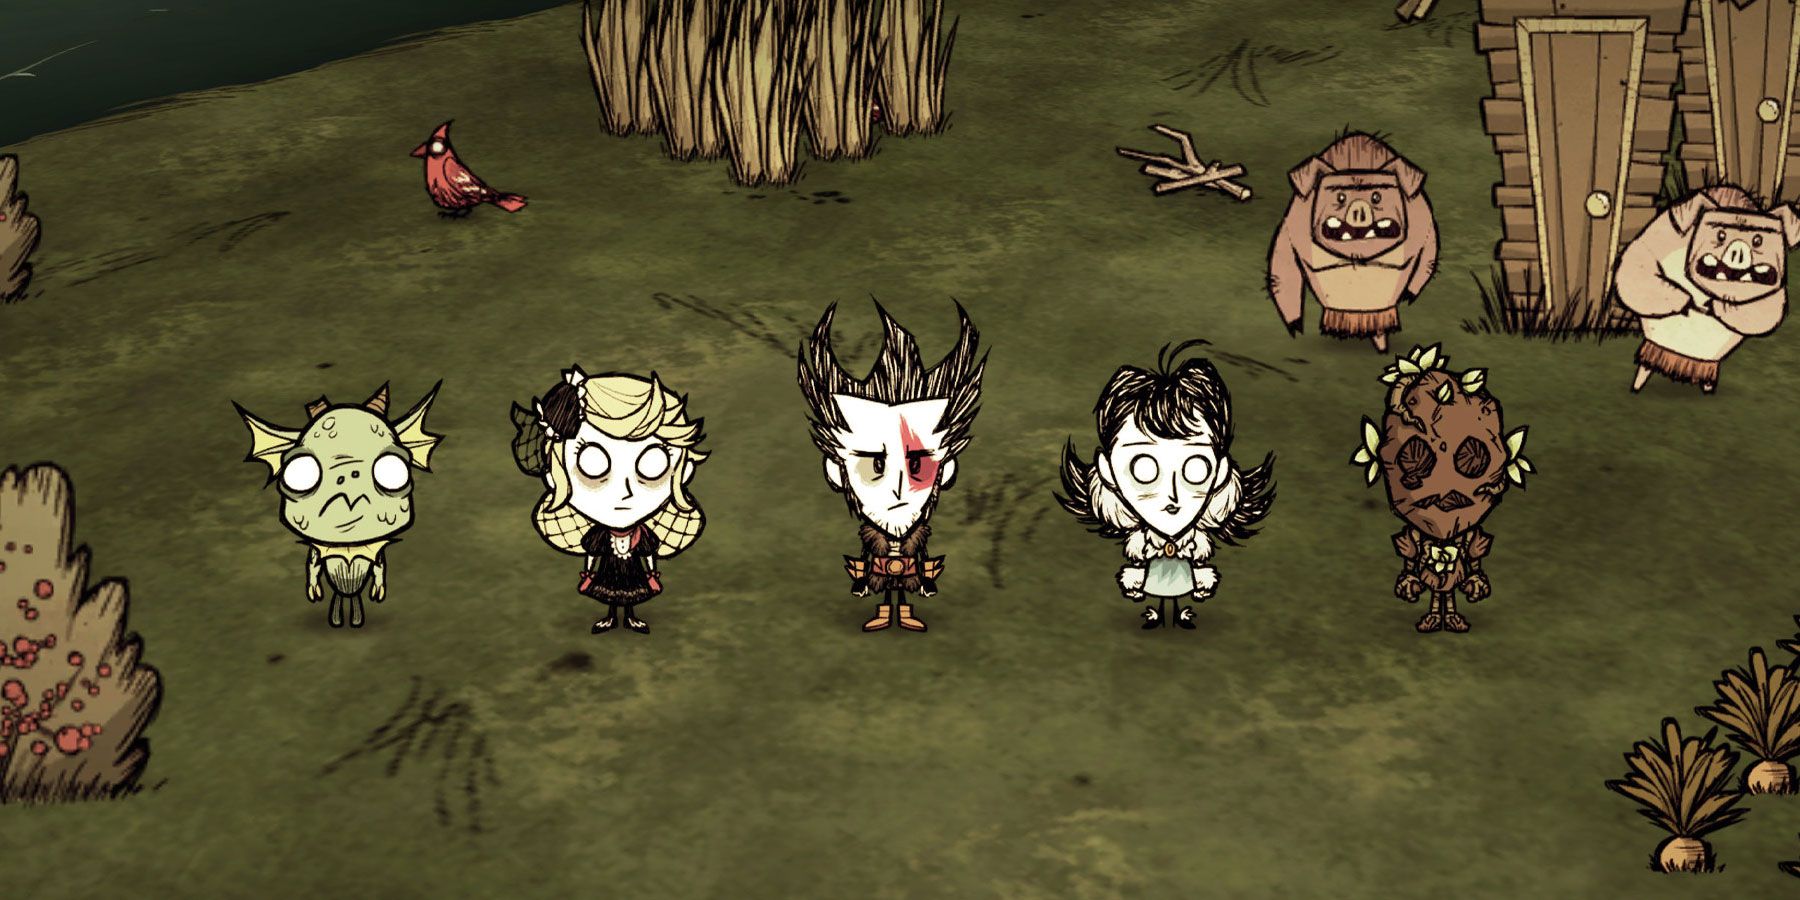 Characters from Don't Starve lined up next to each other